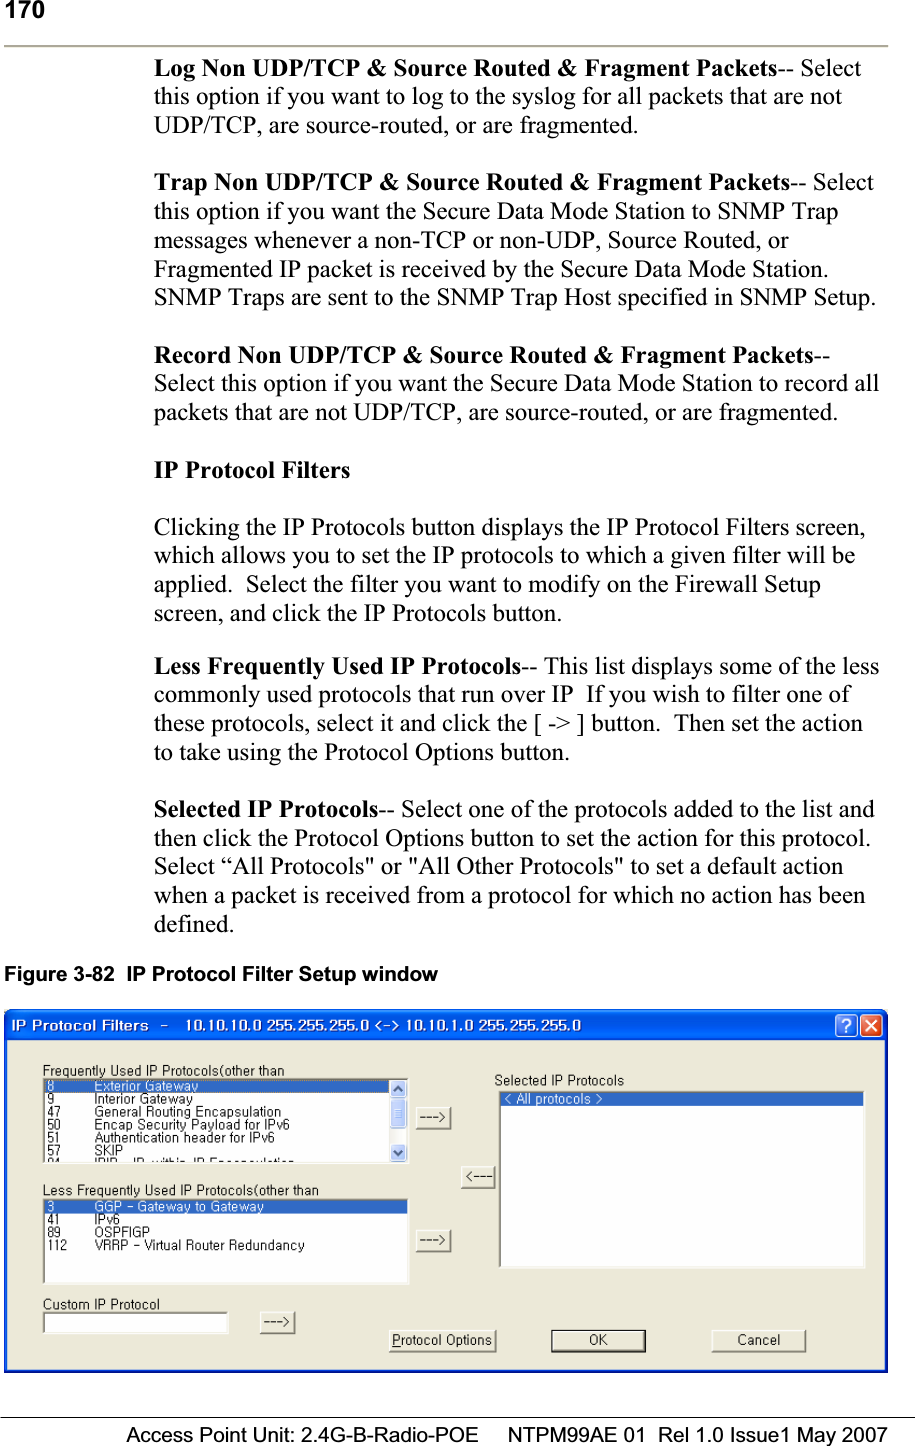 170 Access Point Unit: 2.4G-B-Radio-POE     NTPM99AE 01  Rel 1.0 Issue1 May 2007Log Non UDP/TCP &amp; Source Routed &amp; Fragment Packets-- Select this option if you want to log to the syslog for all packets that are not UDP/TCP, are source-routed, or are fragmented. Trap Non UDP/TCP &amp; Source Routed &amp; Fragment Packets-- Select this option if you want the Secure Data Mode Station to SNMP Trap messages whenever a non-TCP or non-UDP, Source Routed, or Fragmented IP packet is received by the Secure Data Mode Station. SNMP Traps are sent to the SNMP Trap Host specified in SNMP Setup. Record Non UDP/TCP &amp; Source Routed &amp; Fragment Packets--Select this option if you want the Secure Data Mode Station to record all packets that are not UDP/TCP, are source-routed, or are fragmented. IP Protocol FiltersClicking the IP Protocols button displays the IP Protocol Filters screen, which allows you to set the IP protocols to which a given filter will be applied.  Select the filter you want to modify on the Firewall Setup screen, and click the IP Protocols button. Less Frequently Used IP Protocols-- This list displays some of the less commonly used protocols that run over IP  If you wish to filter one of these protocols, select it and click the [ -&gt; ] button.  Then set the action to take using the Protocol Options button. Selected IP Protocols-- Select one of the protocols added to the list and then click the Protocol Options button to set the action for this protocol.Select “All Protocols&quot; or &quot;All Other Protocols&quot; to set a default action when a packet is received from a protocol for which no action has been defined.Figure 3-82  IP Protocol Filter Setup window 